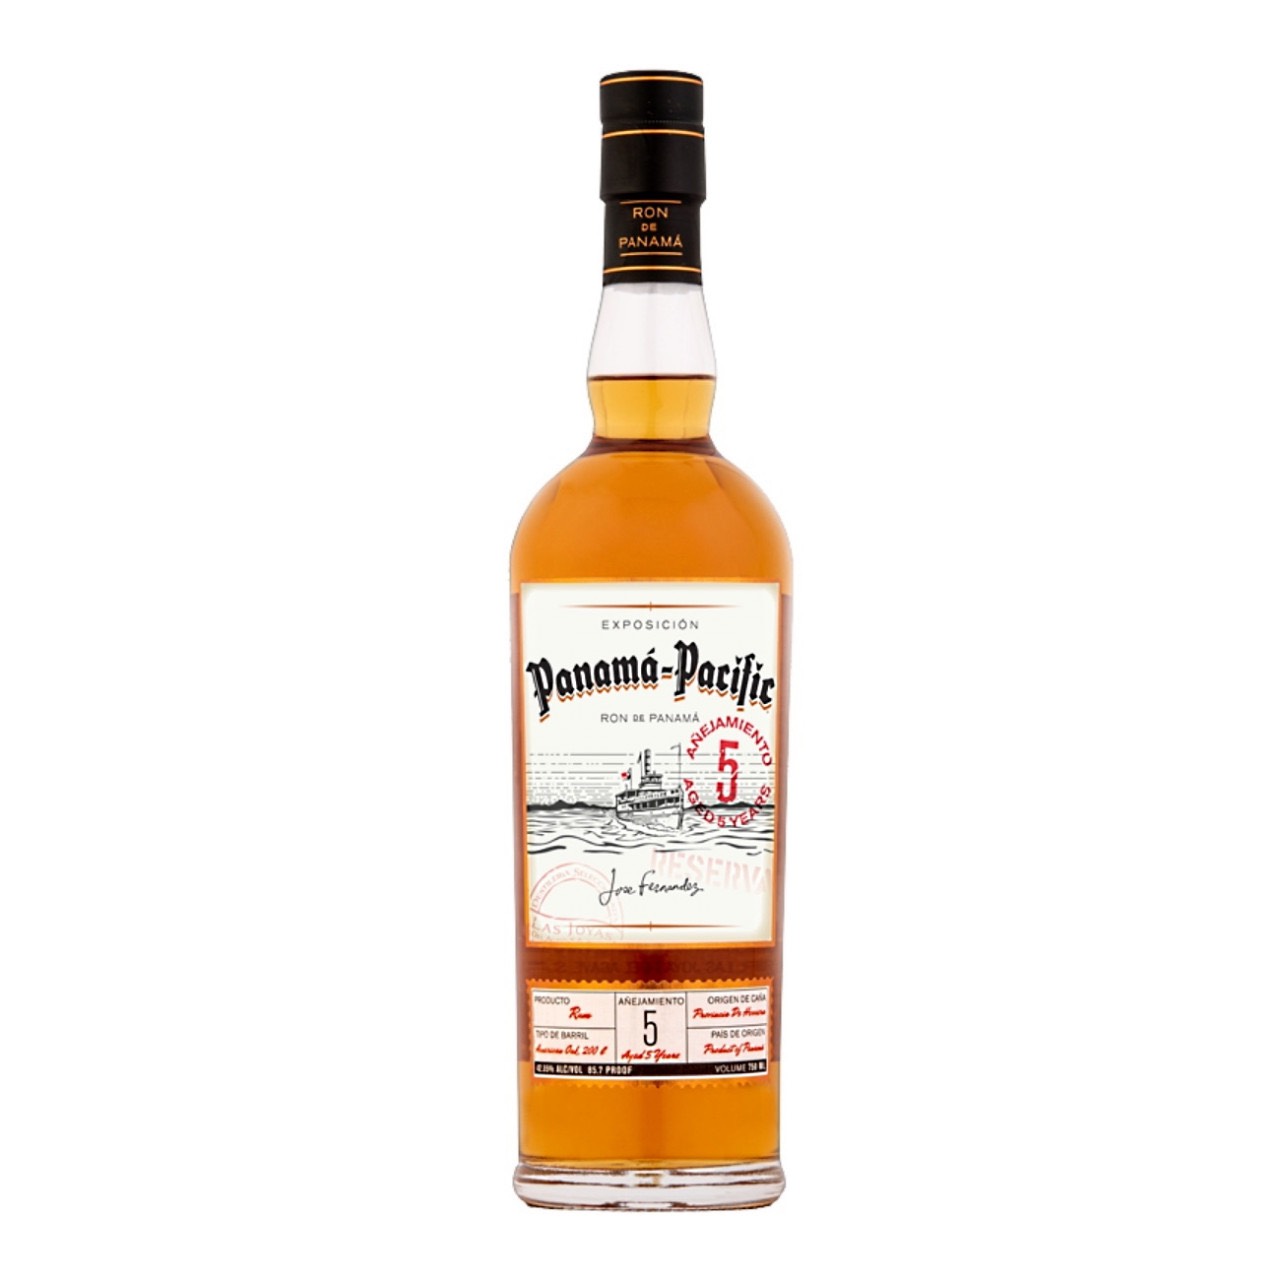 Bottle image of Panama-Pacific Aged 5 Years